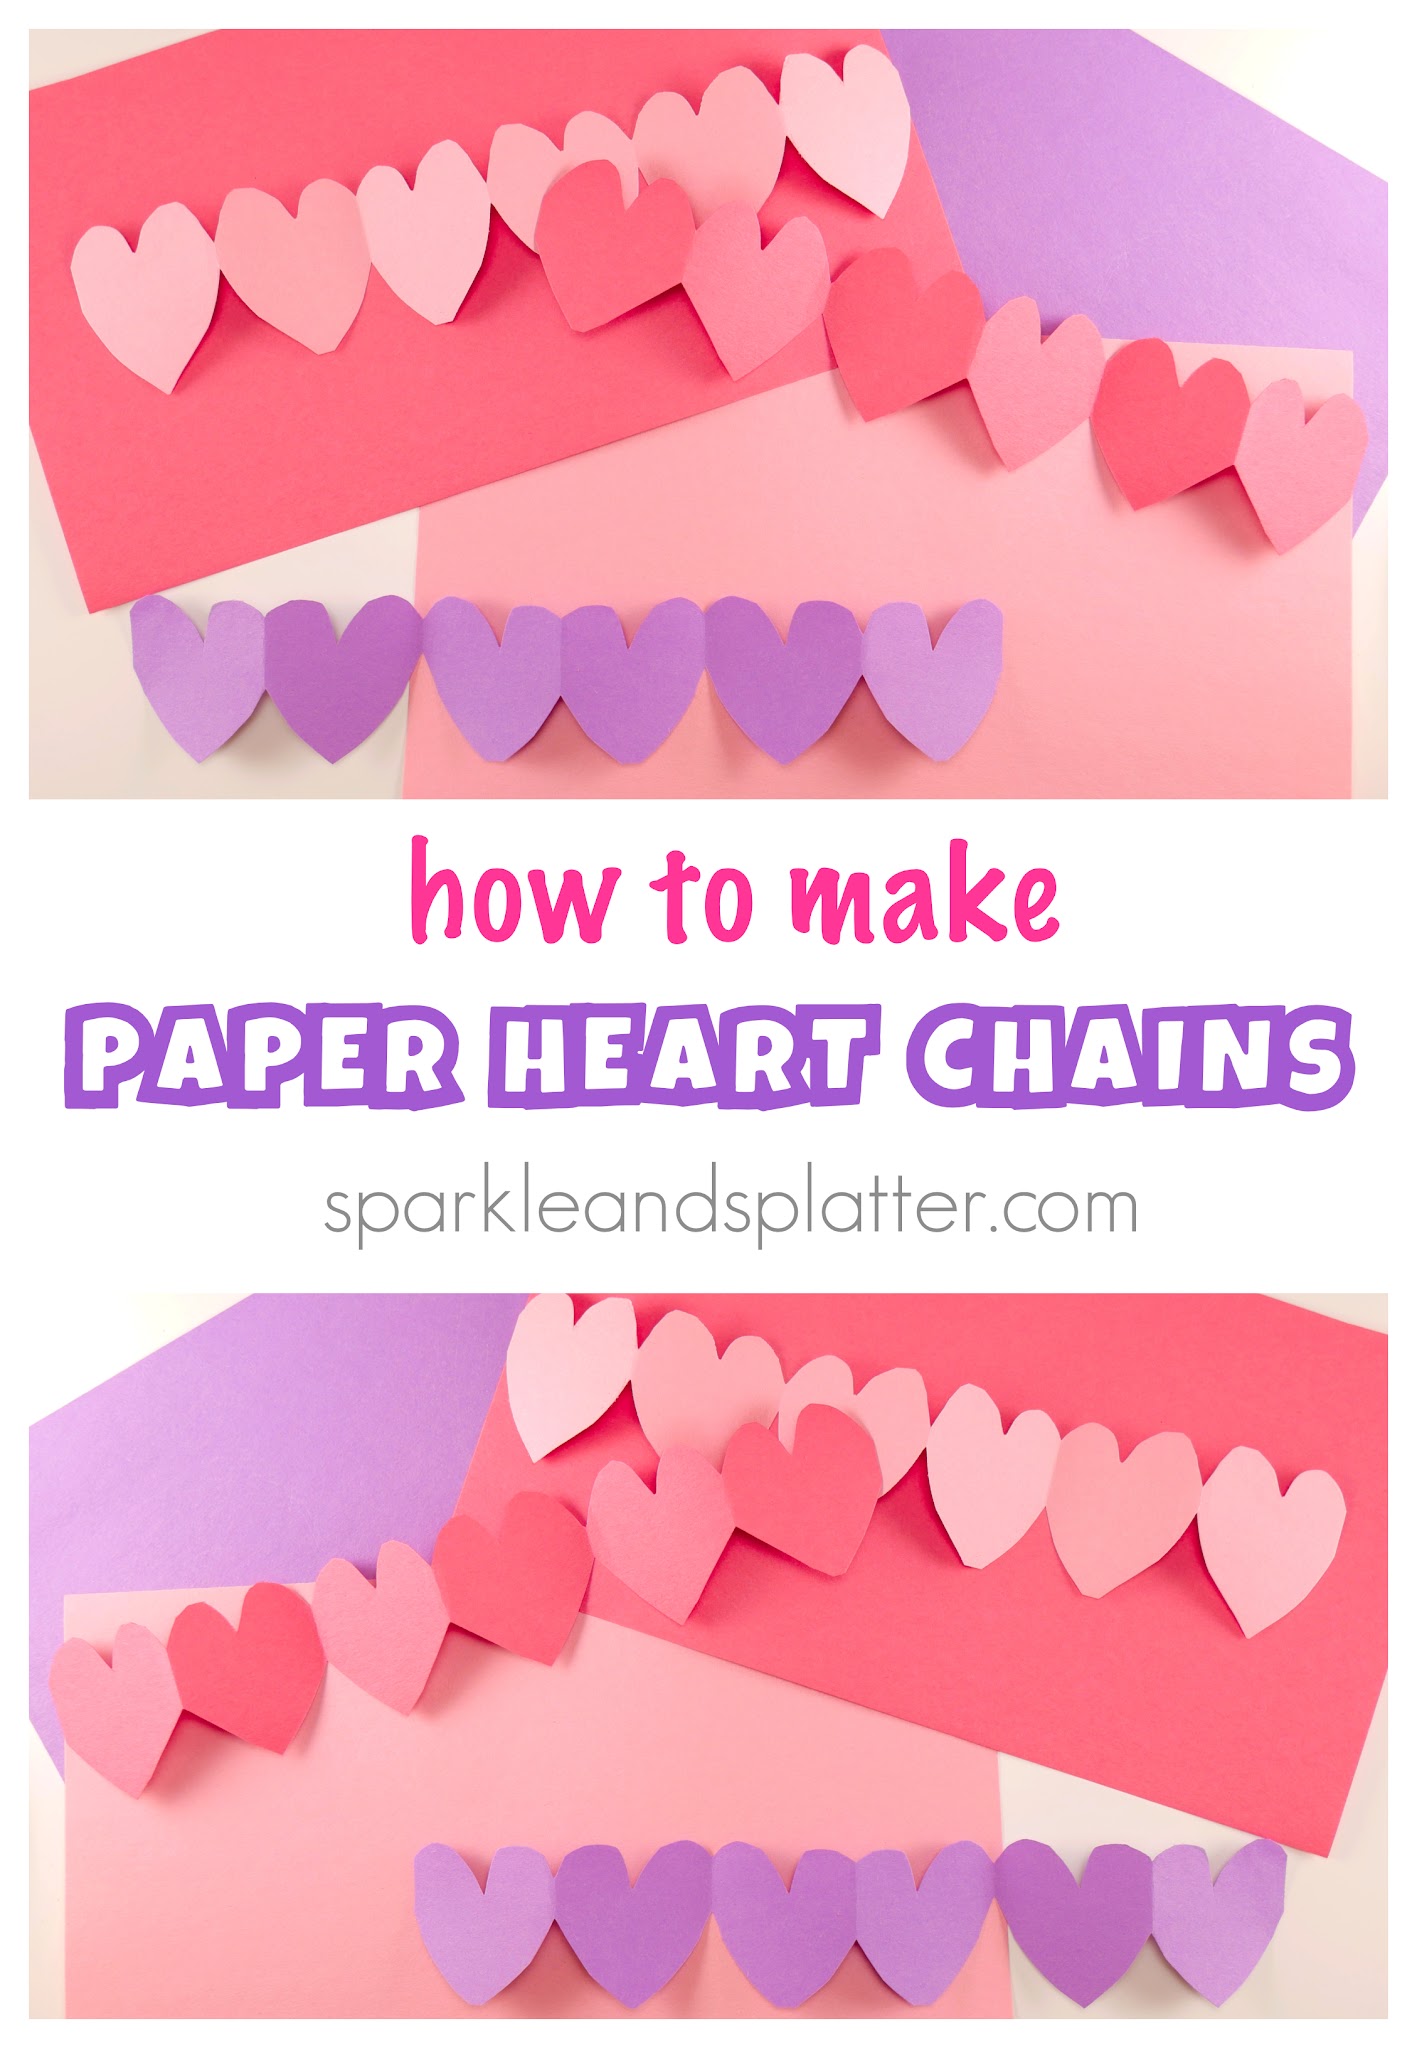 Paper Heart Chains